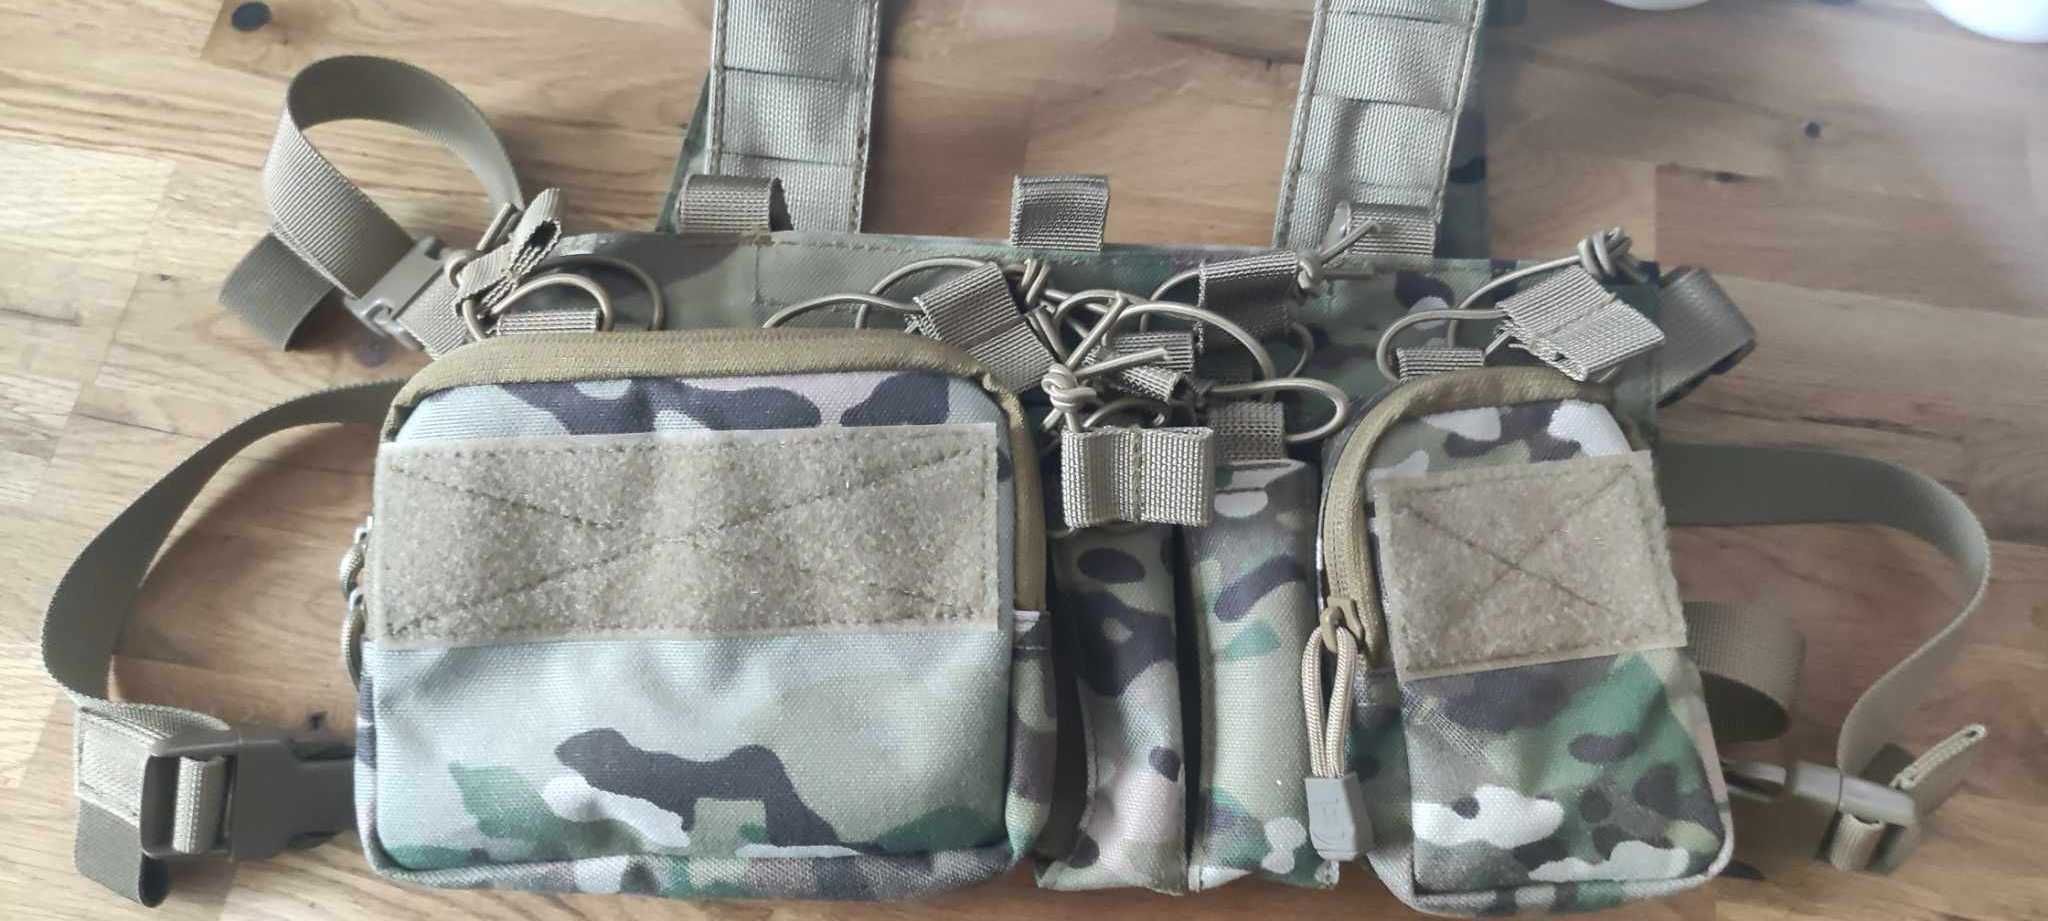 CHEST RIG - Multicam firmy 8FIELDS Buckle Up